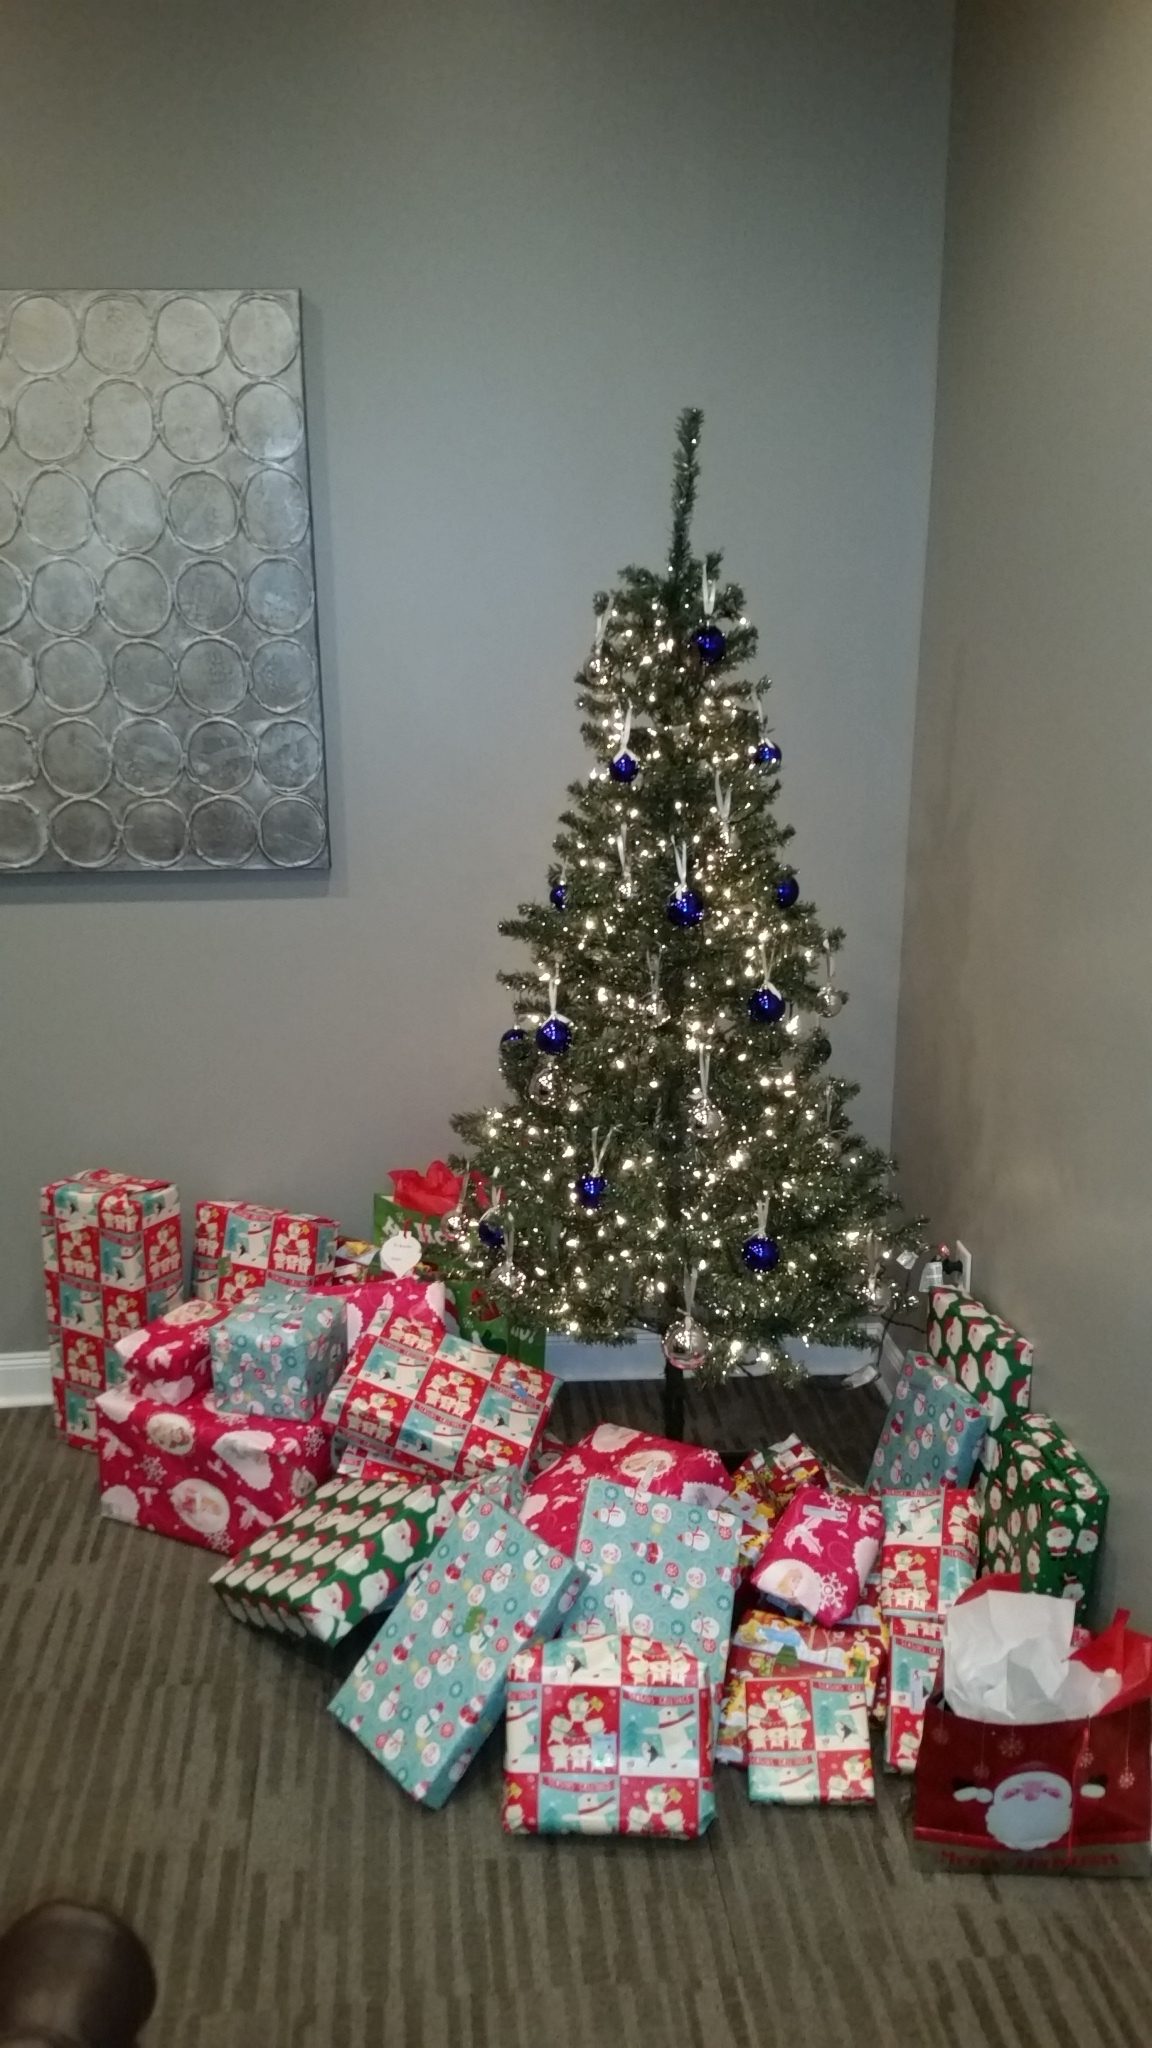 Excited to Provide Christmas to a Veteran in Need